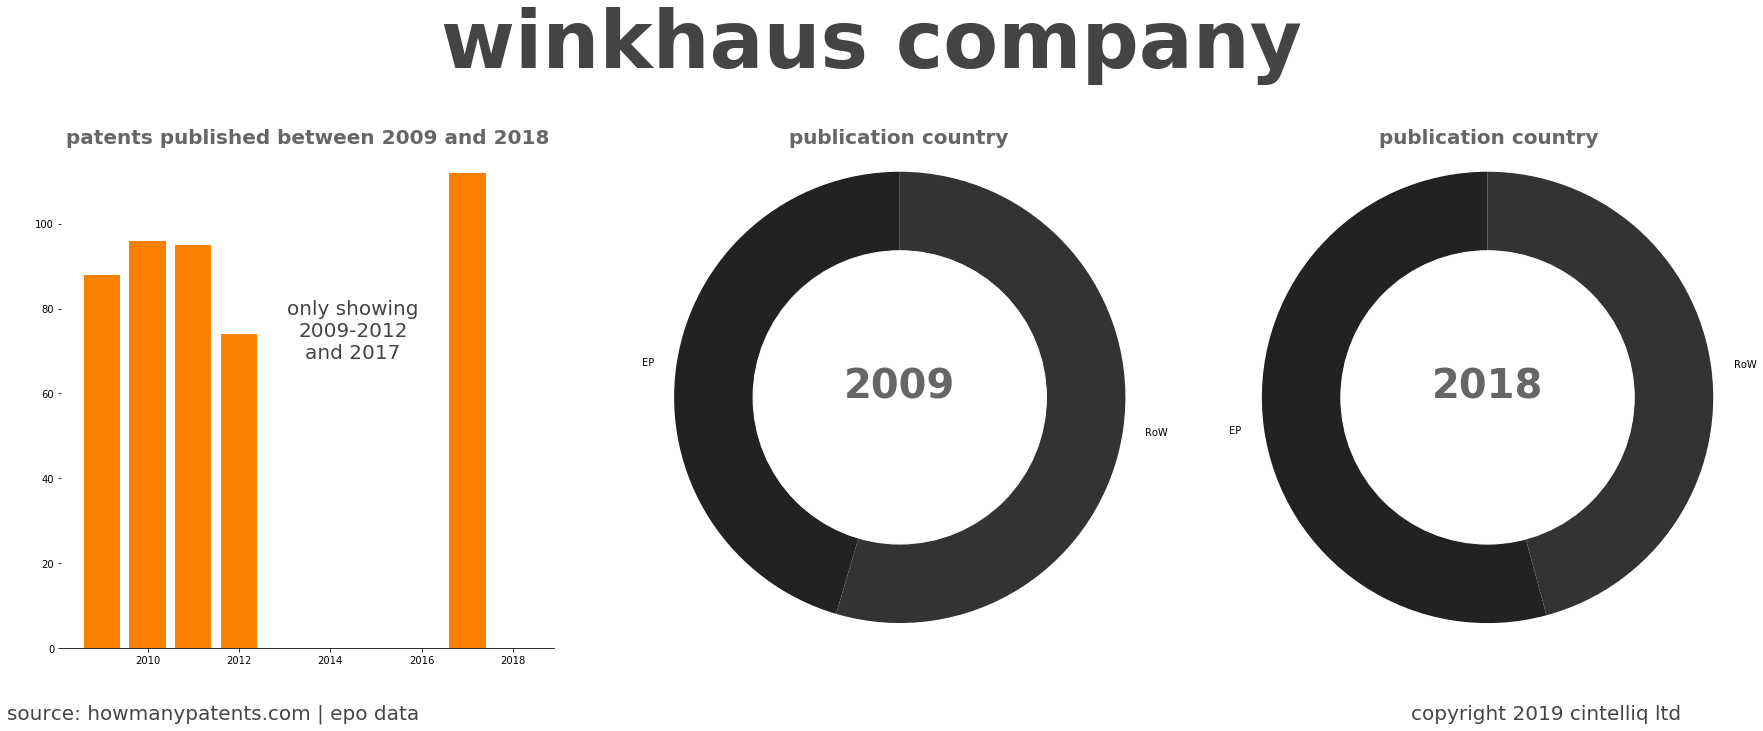 summary of patents for Winkhaus Company